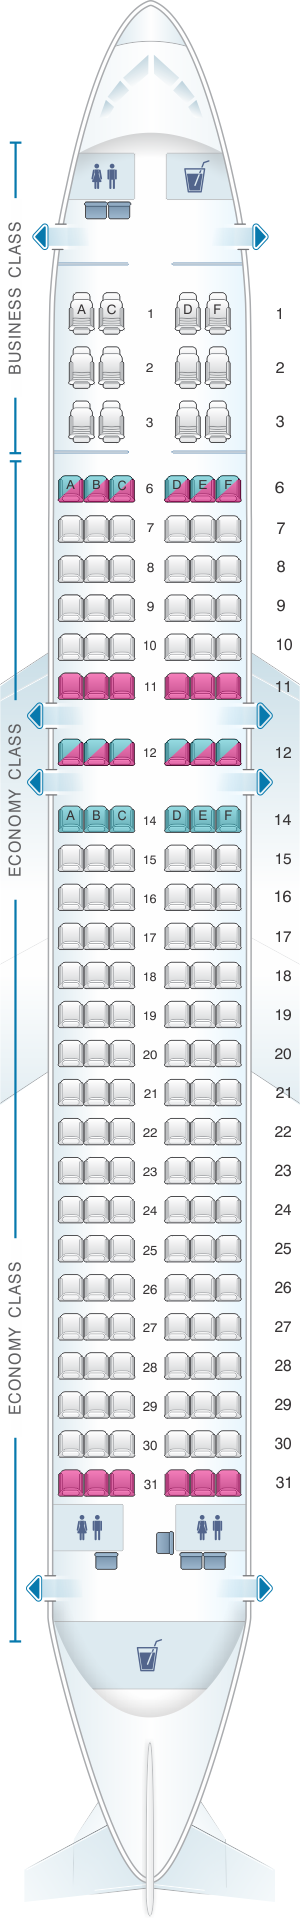 Seat map for SriLankan Airlines Airbus A320 Config. 1